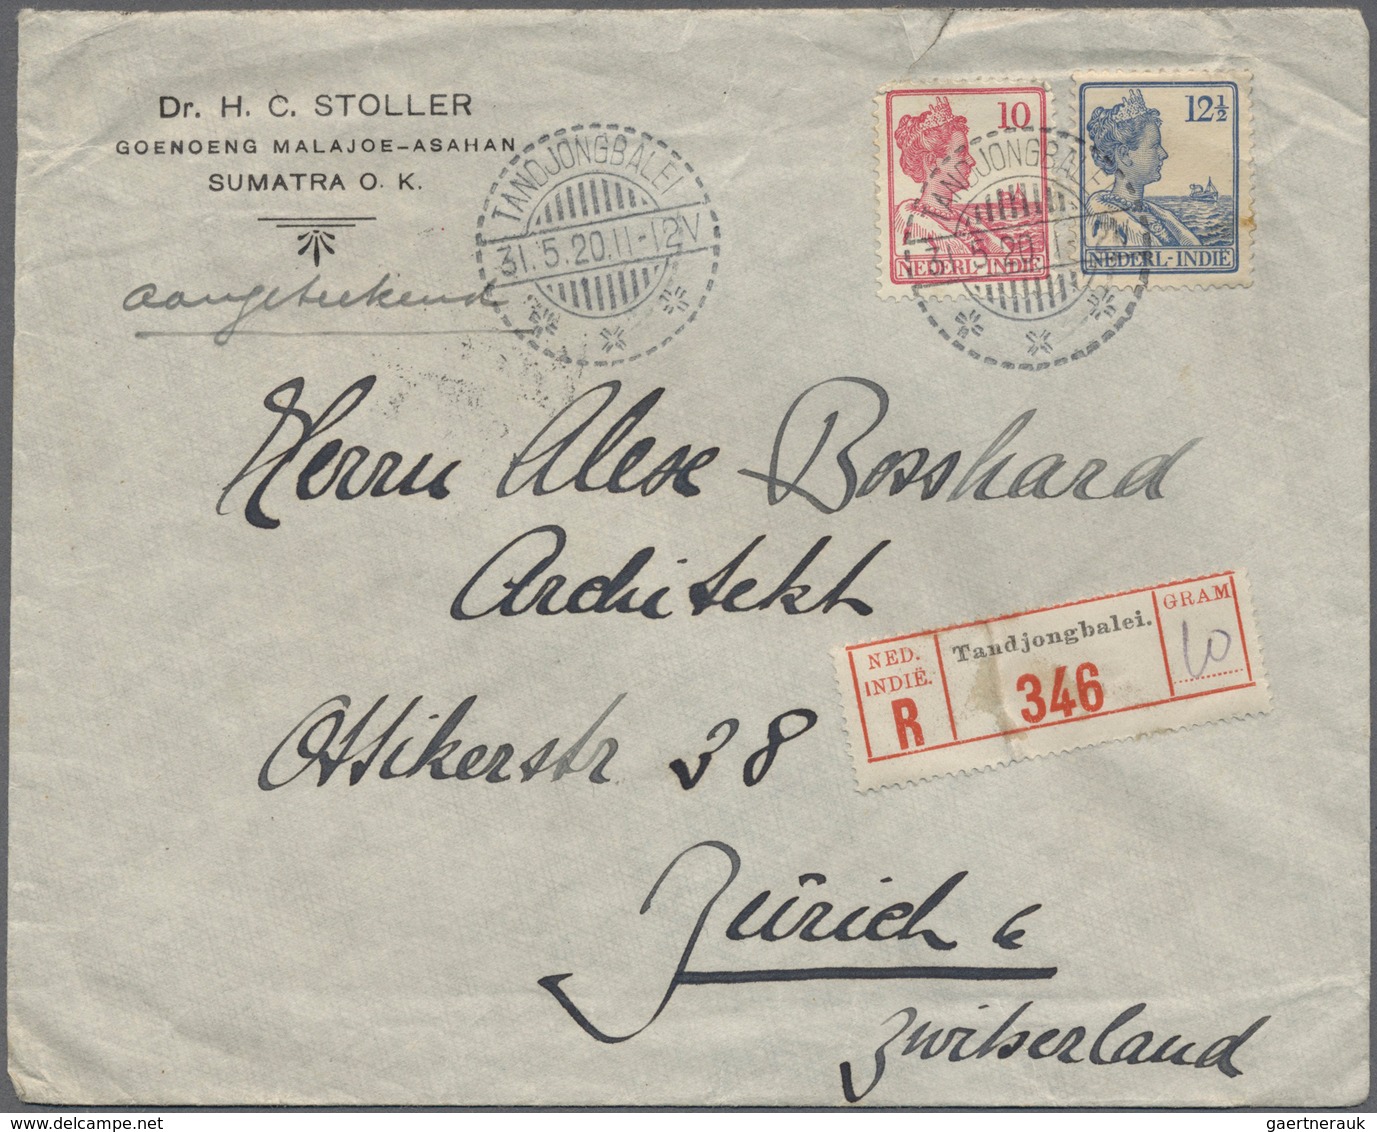 Niederländisch-Indien: 1892/1924 (ca.), covers/ppc/used stationery (17) inc. censorship and registra